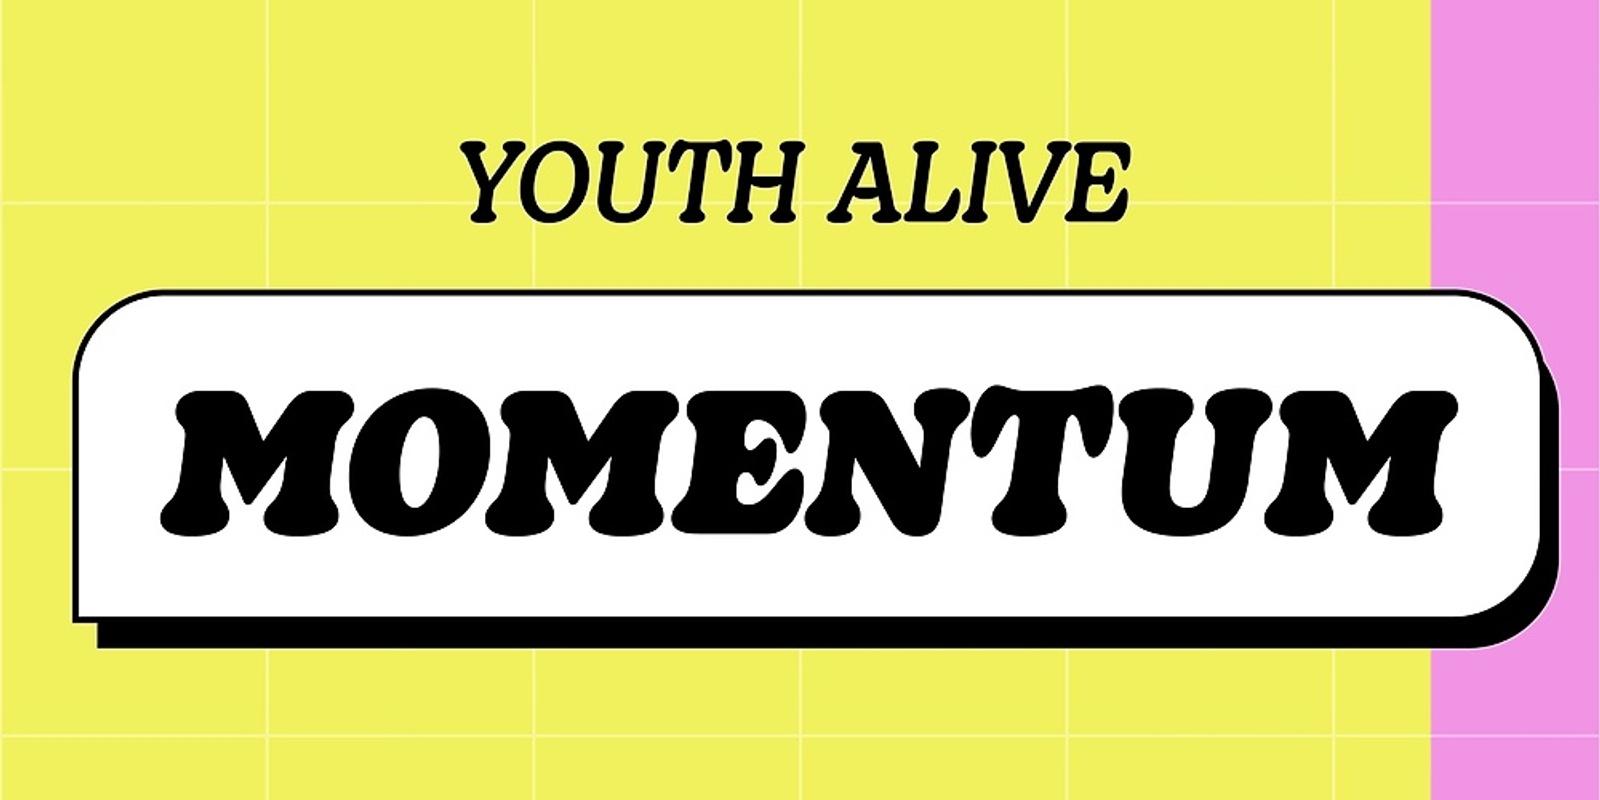 Banner image for Youth Alive Momentum South